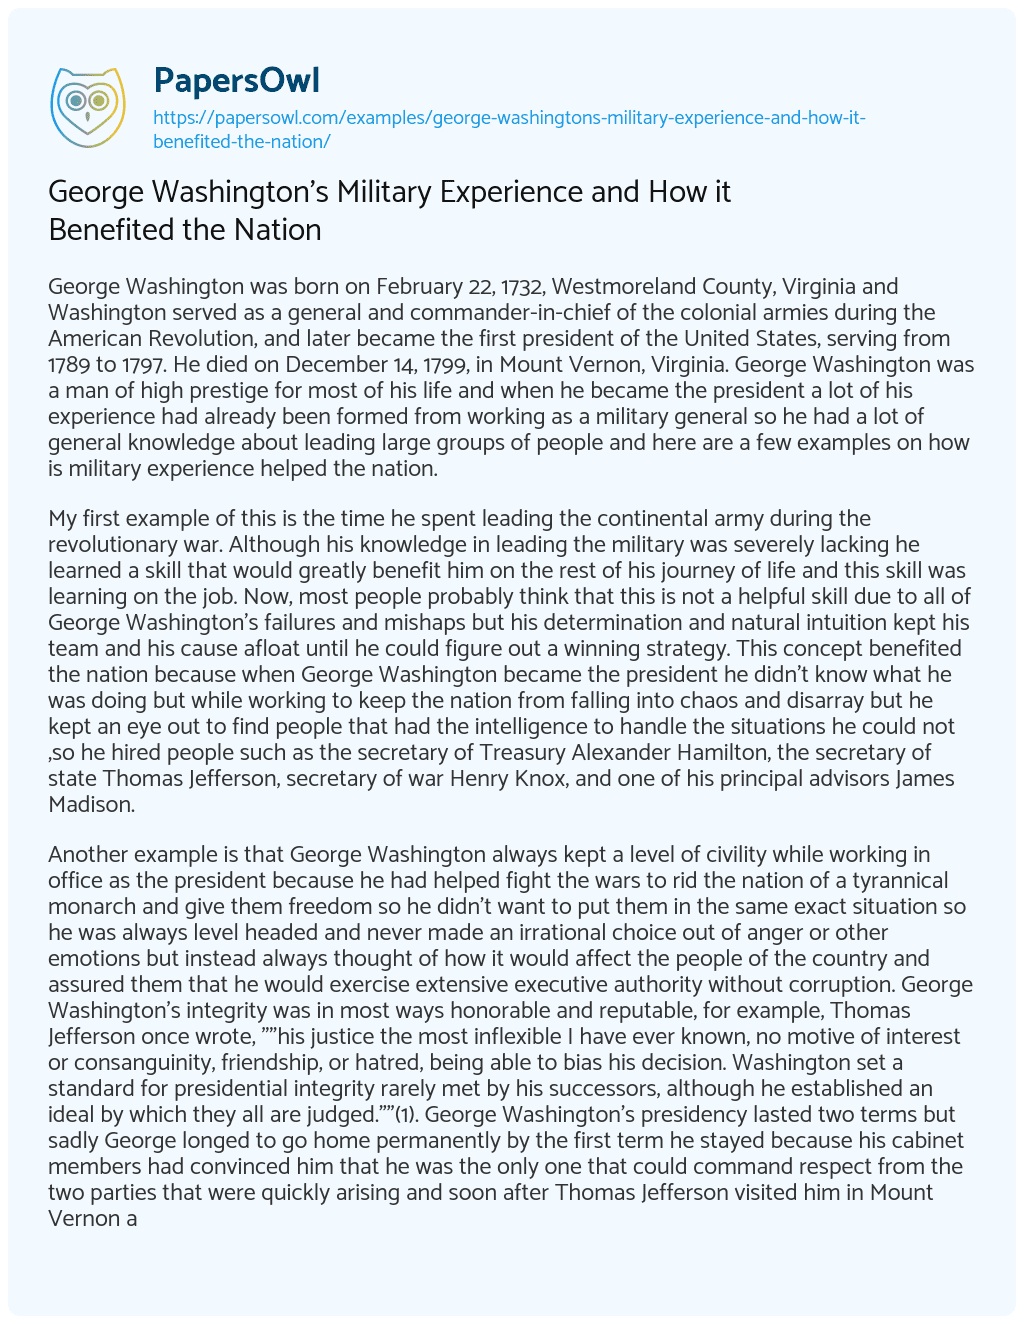 George Washington’s Military Experience and how it Benefited the Nation essay